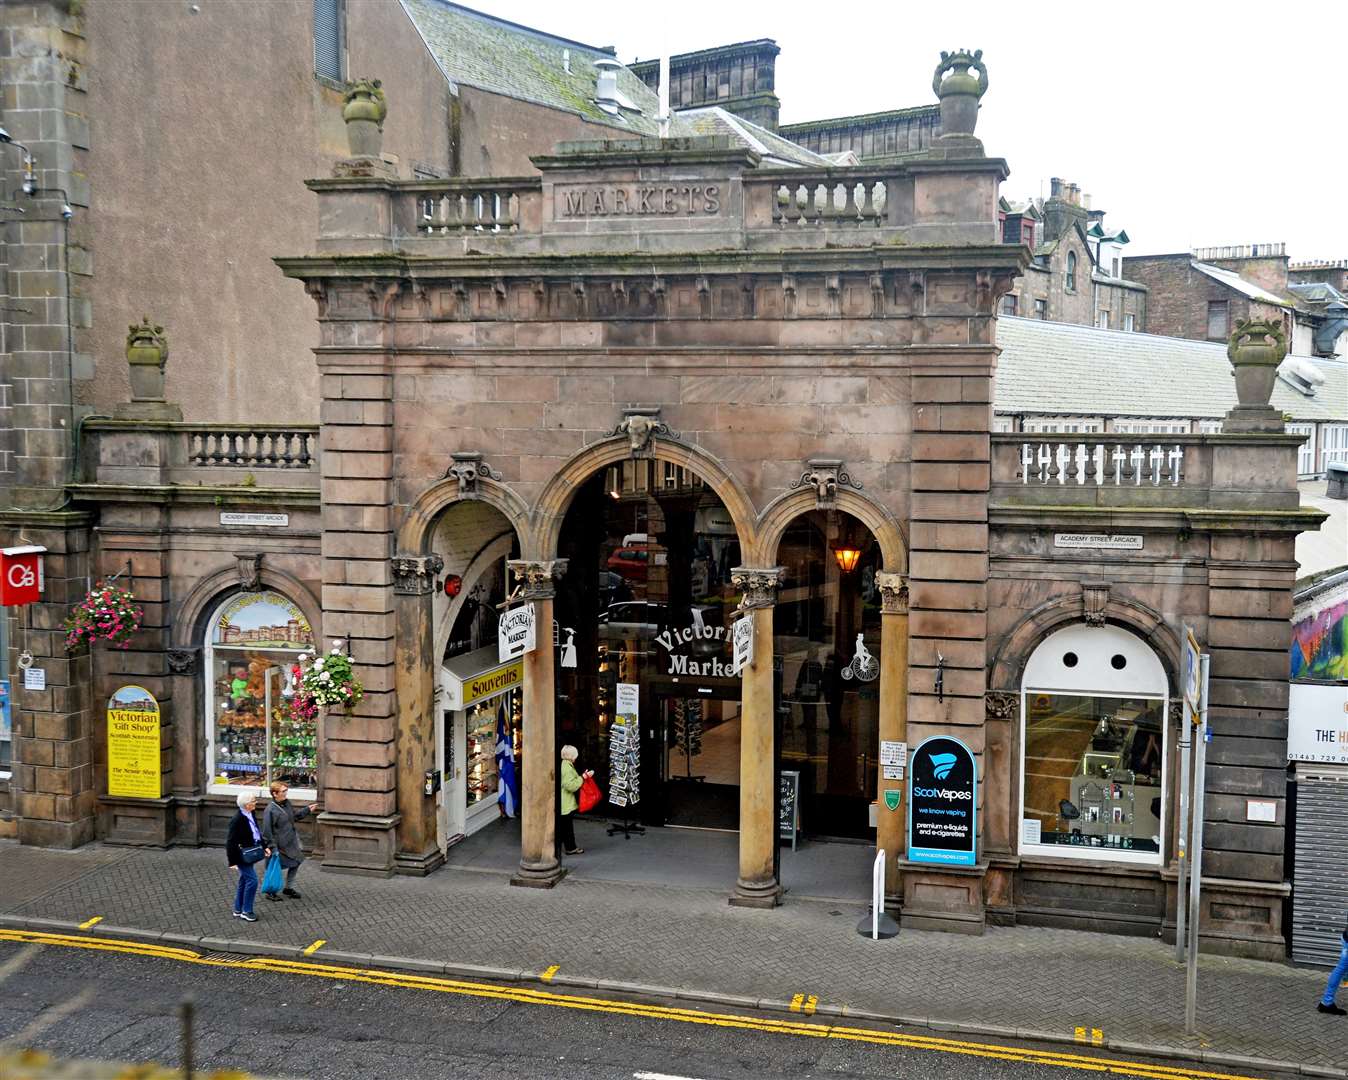 The main entrance to the Victorian Market in Academy Street, Inverness.